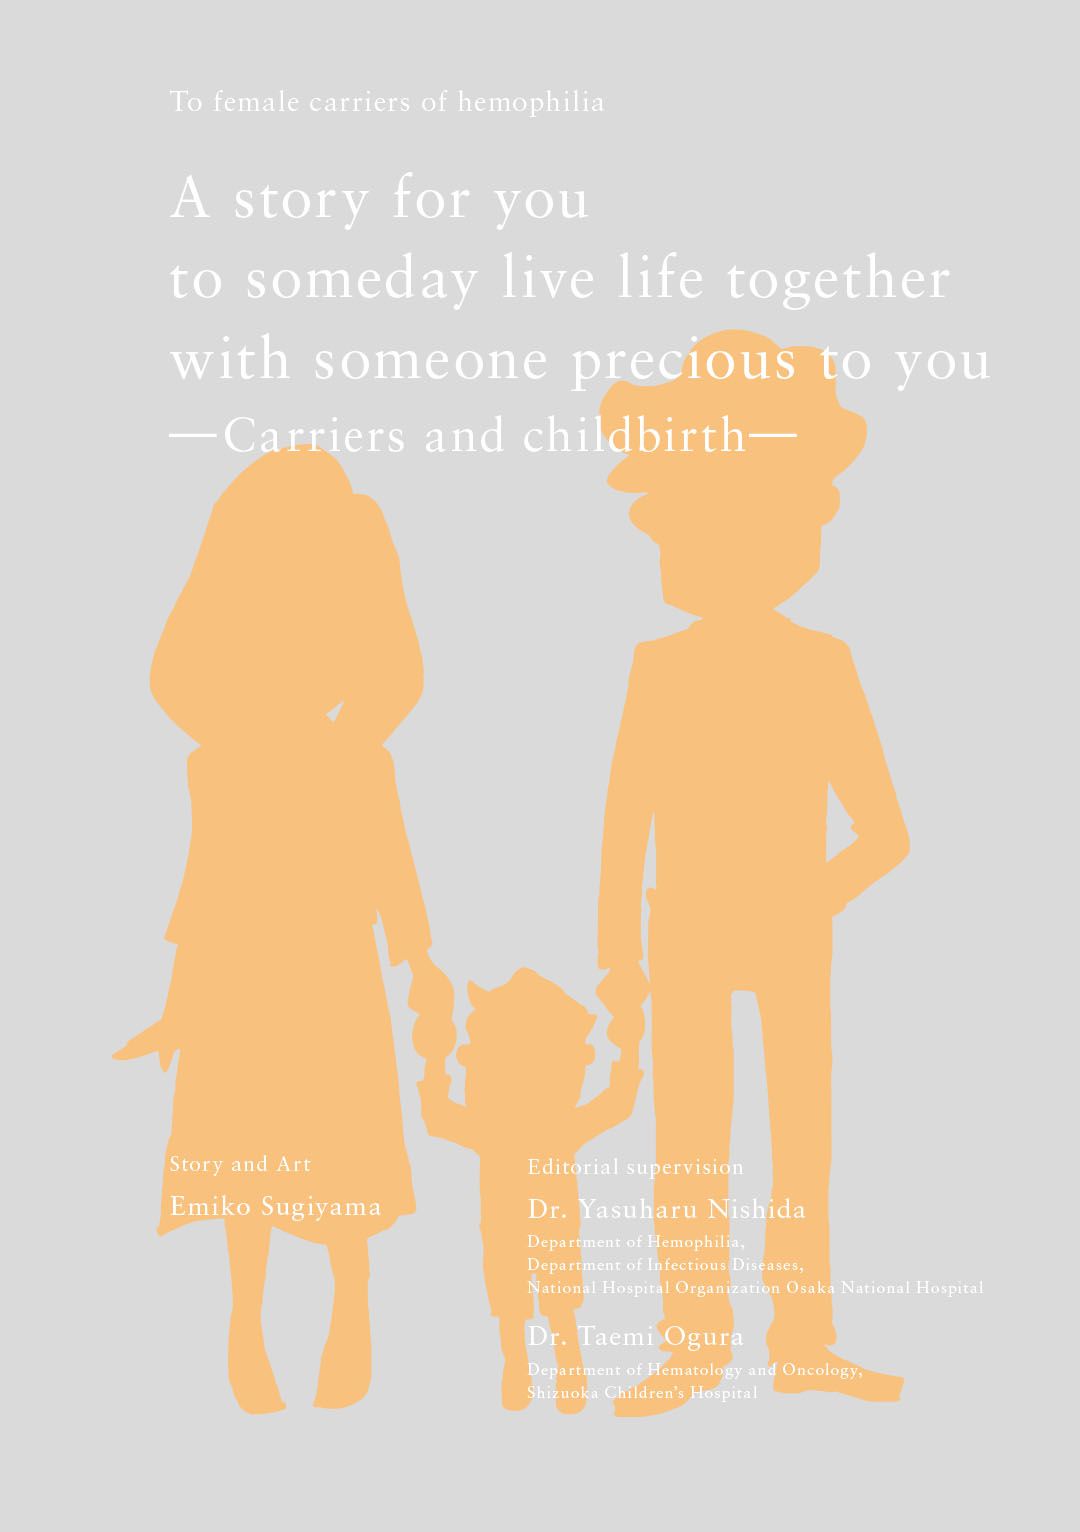 Comics「A story for you to someday live life together with someone precious to you 一Carriers and childbirth一」